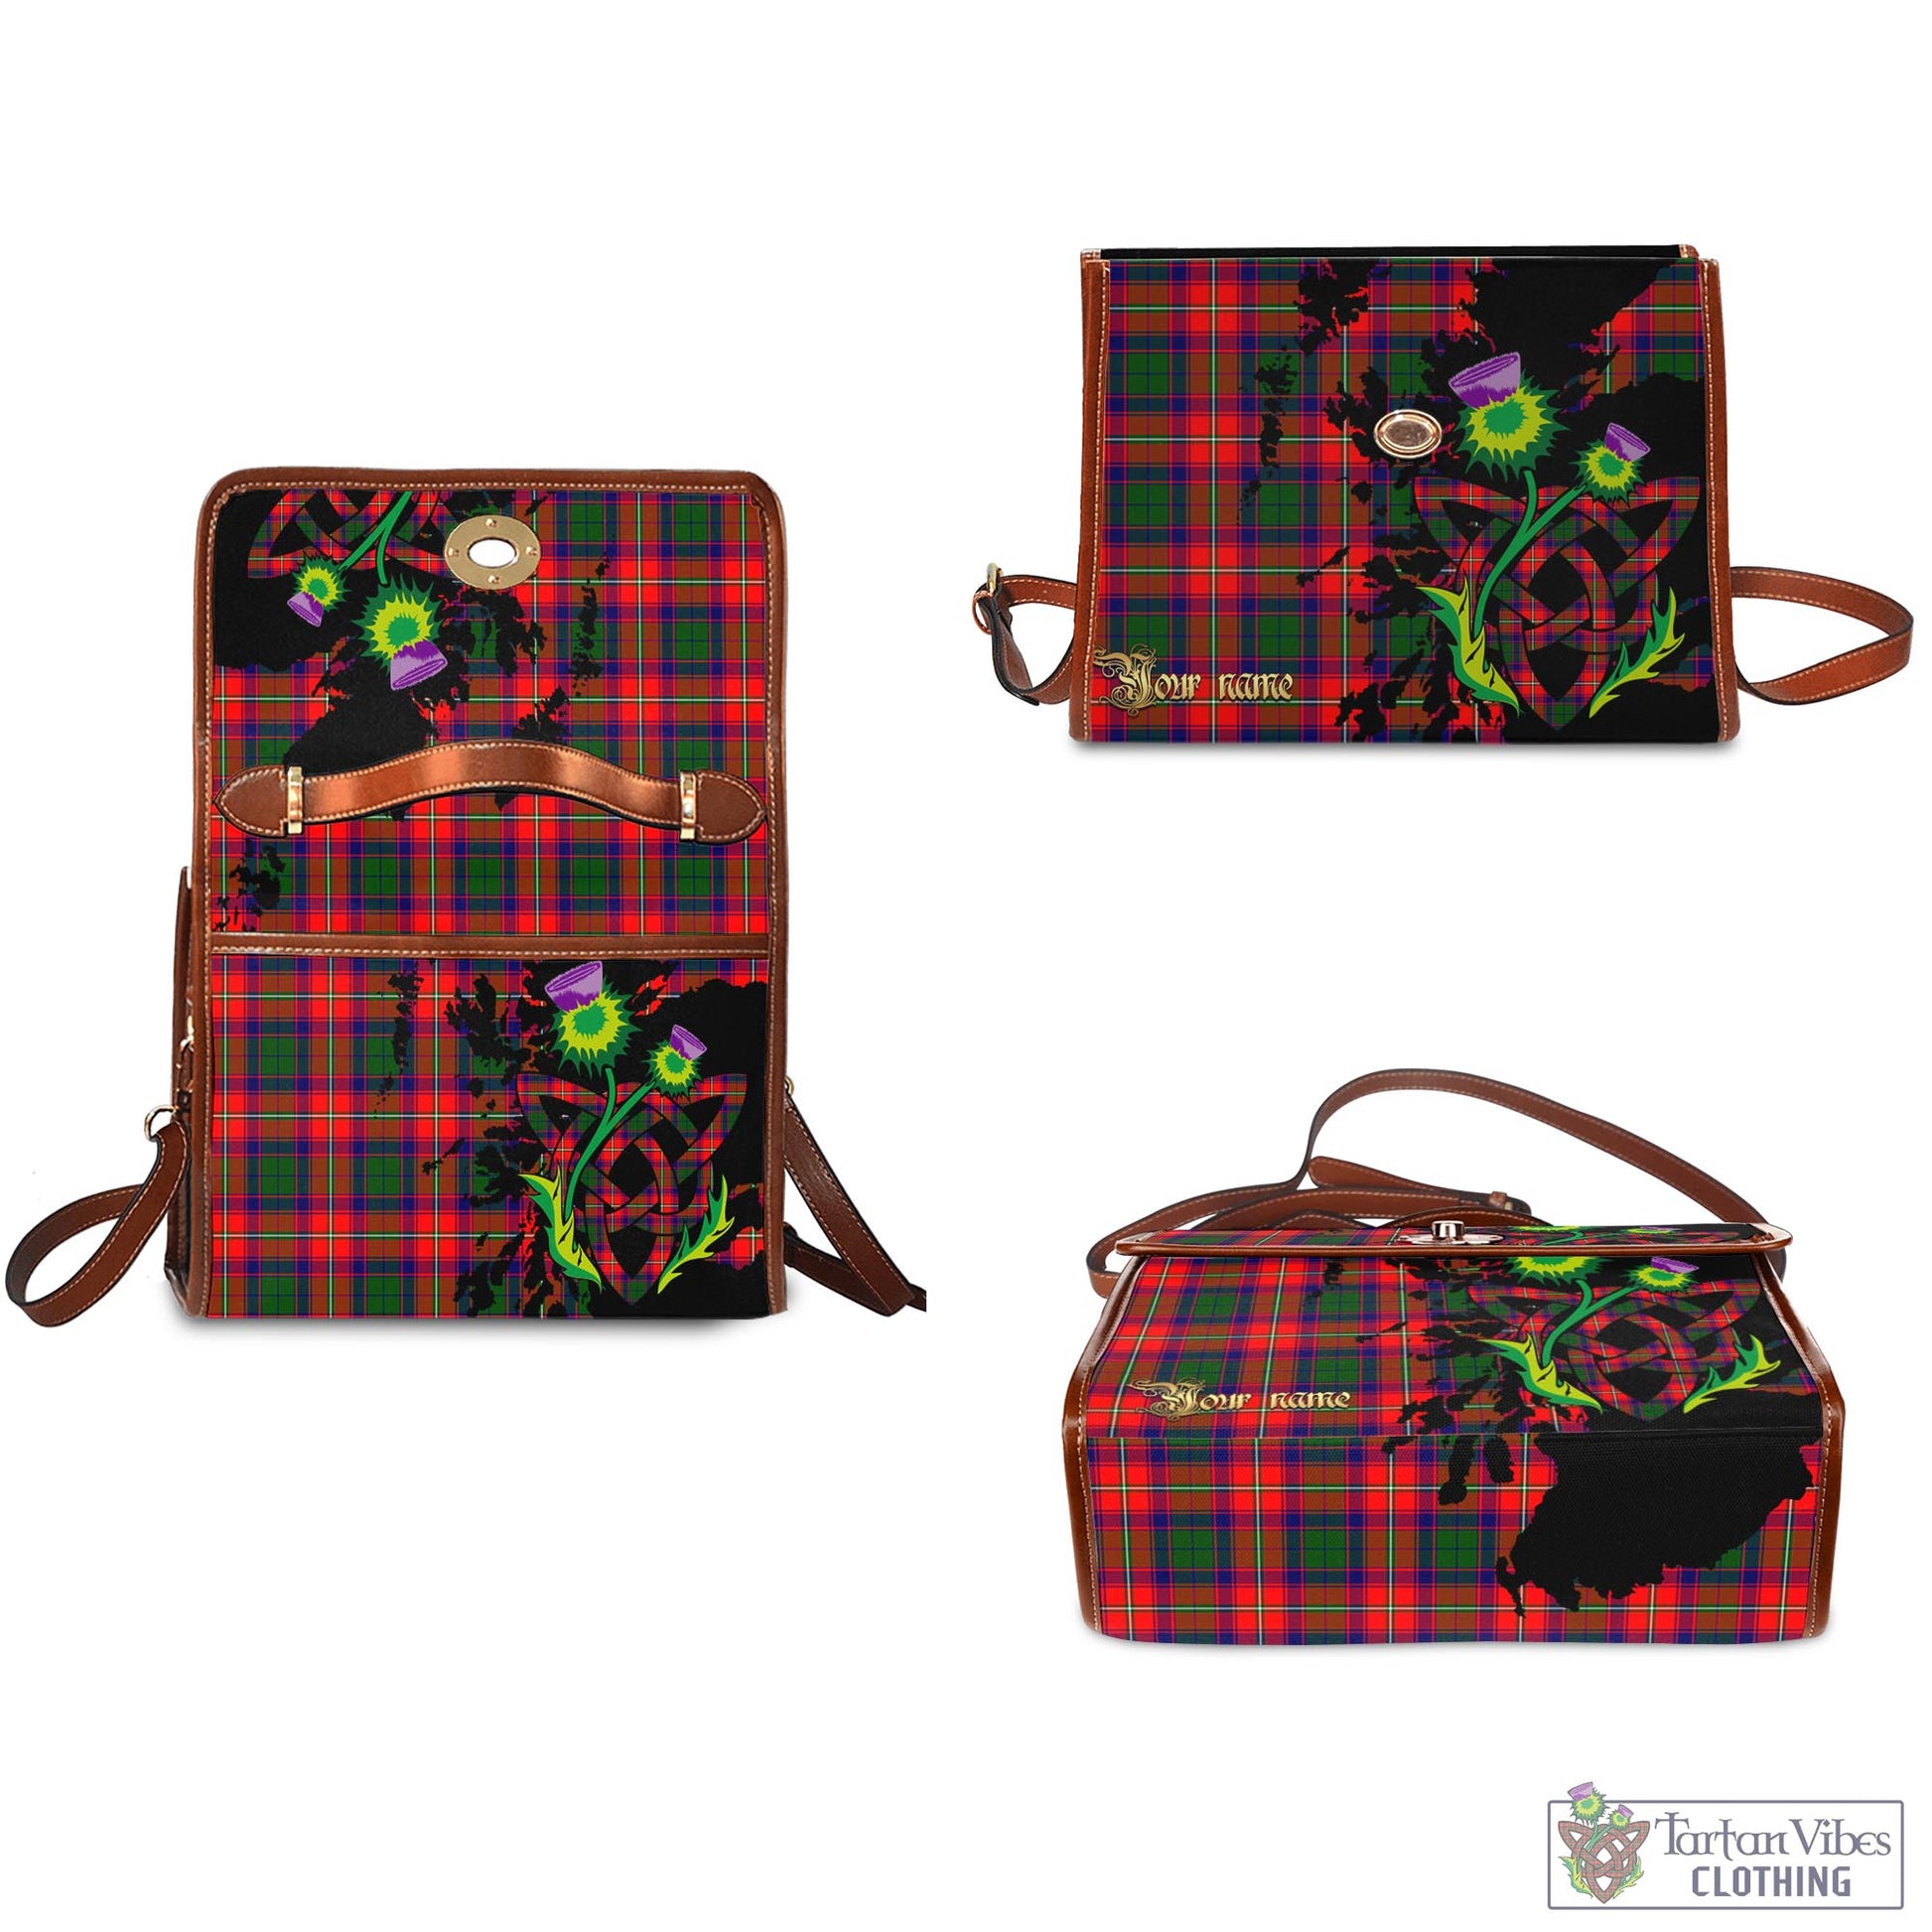 Tartan Vibes Clothing Hopkirk Tartan Waterproof Canvas Bag with Scotland Map and Thistle Celtic Accents